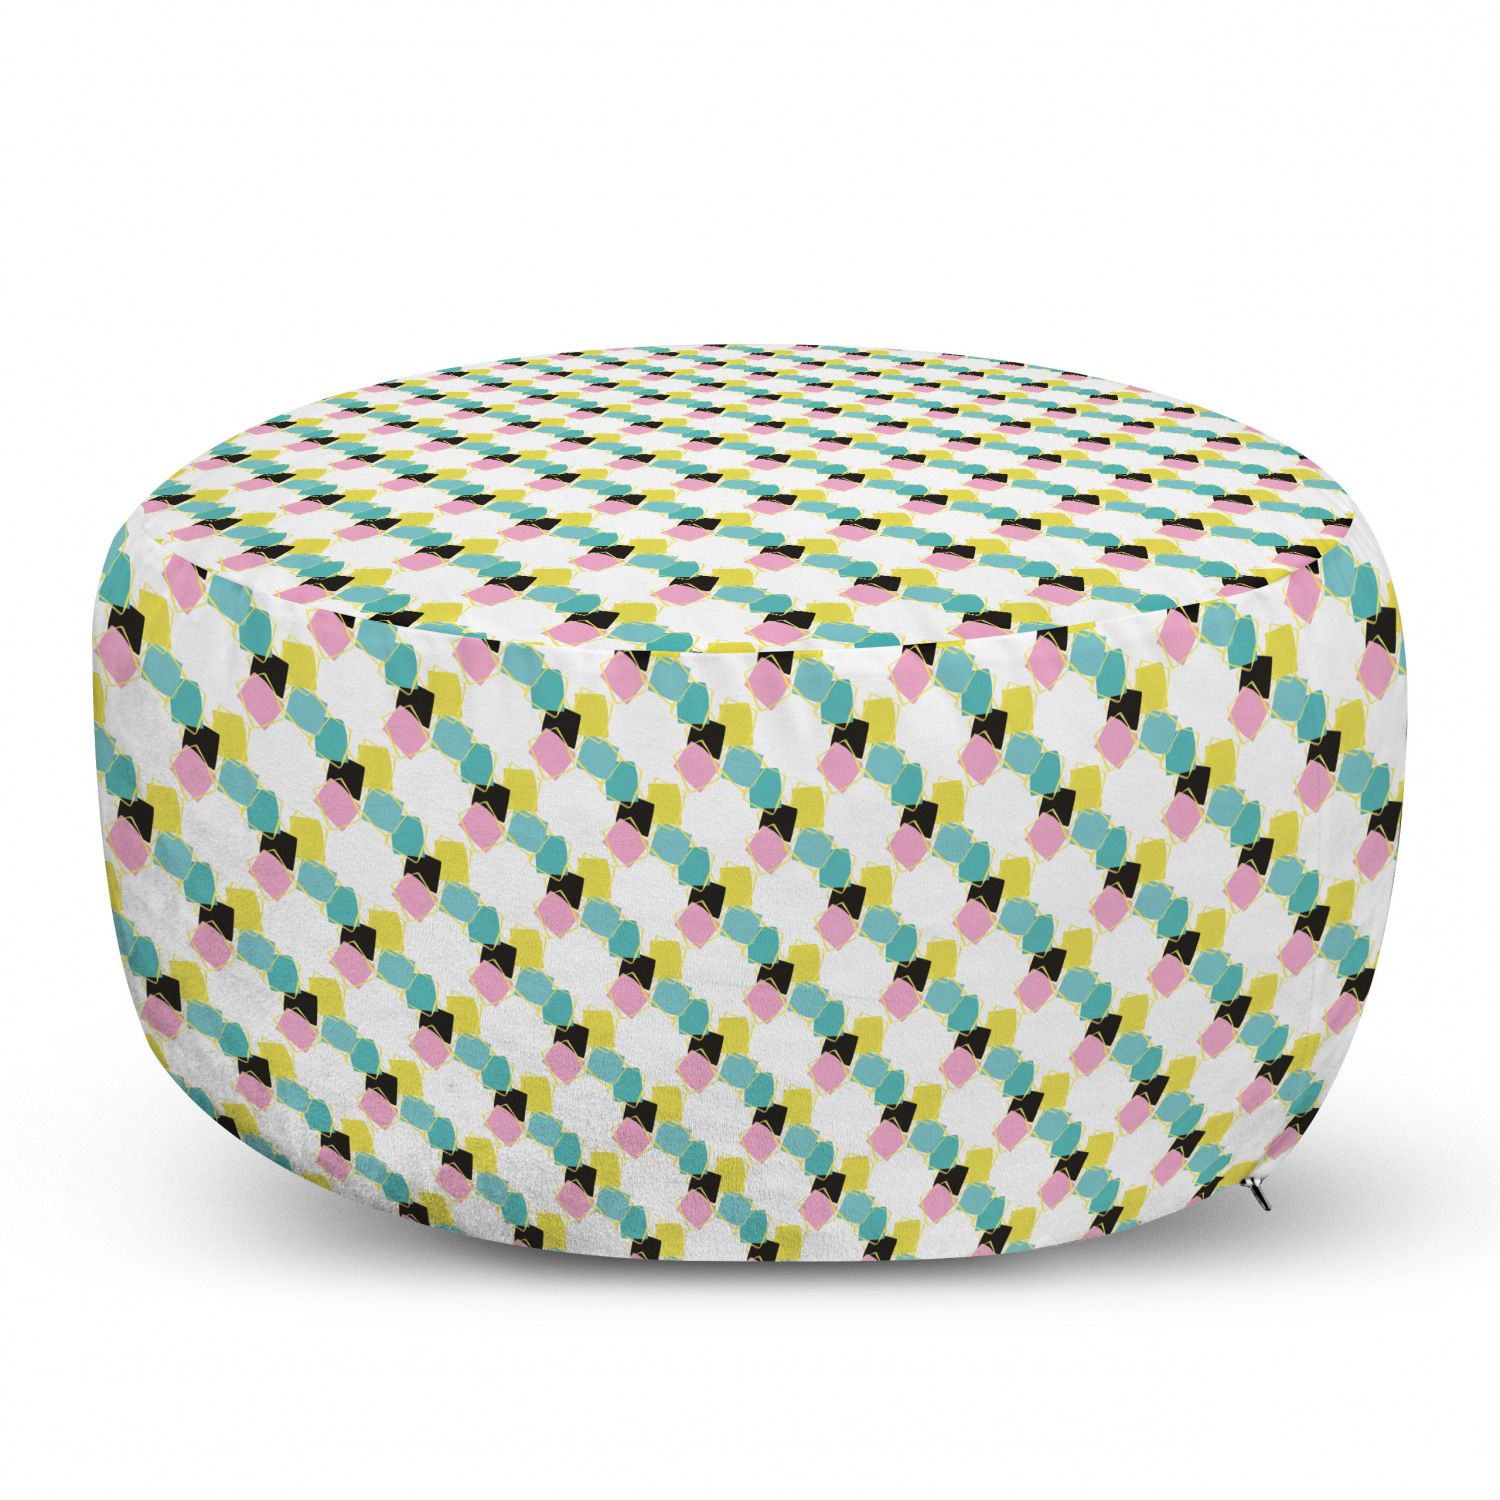 Geometric Ottoman Pouf, Memphis Art Abstract Pattern With Squares,  Decorative Soft Foot Rest With Removable Cover Living Room And Bedroom,  Ivory Multicolor,ambesonne – Walmart Pertaining To Soft Ivory Geometric Ottomans (View 11 of 15)